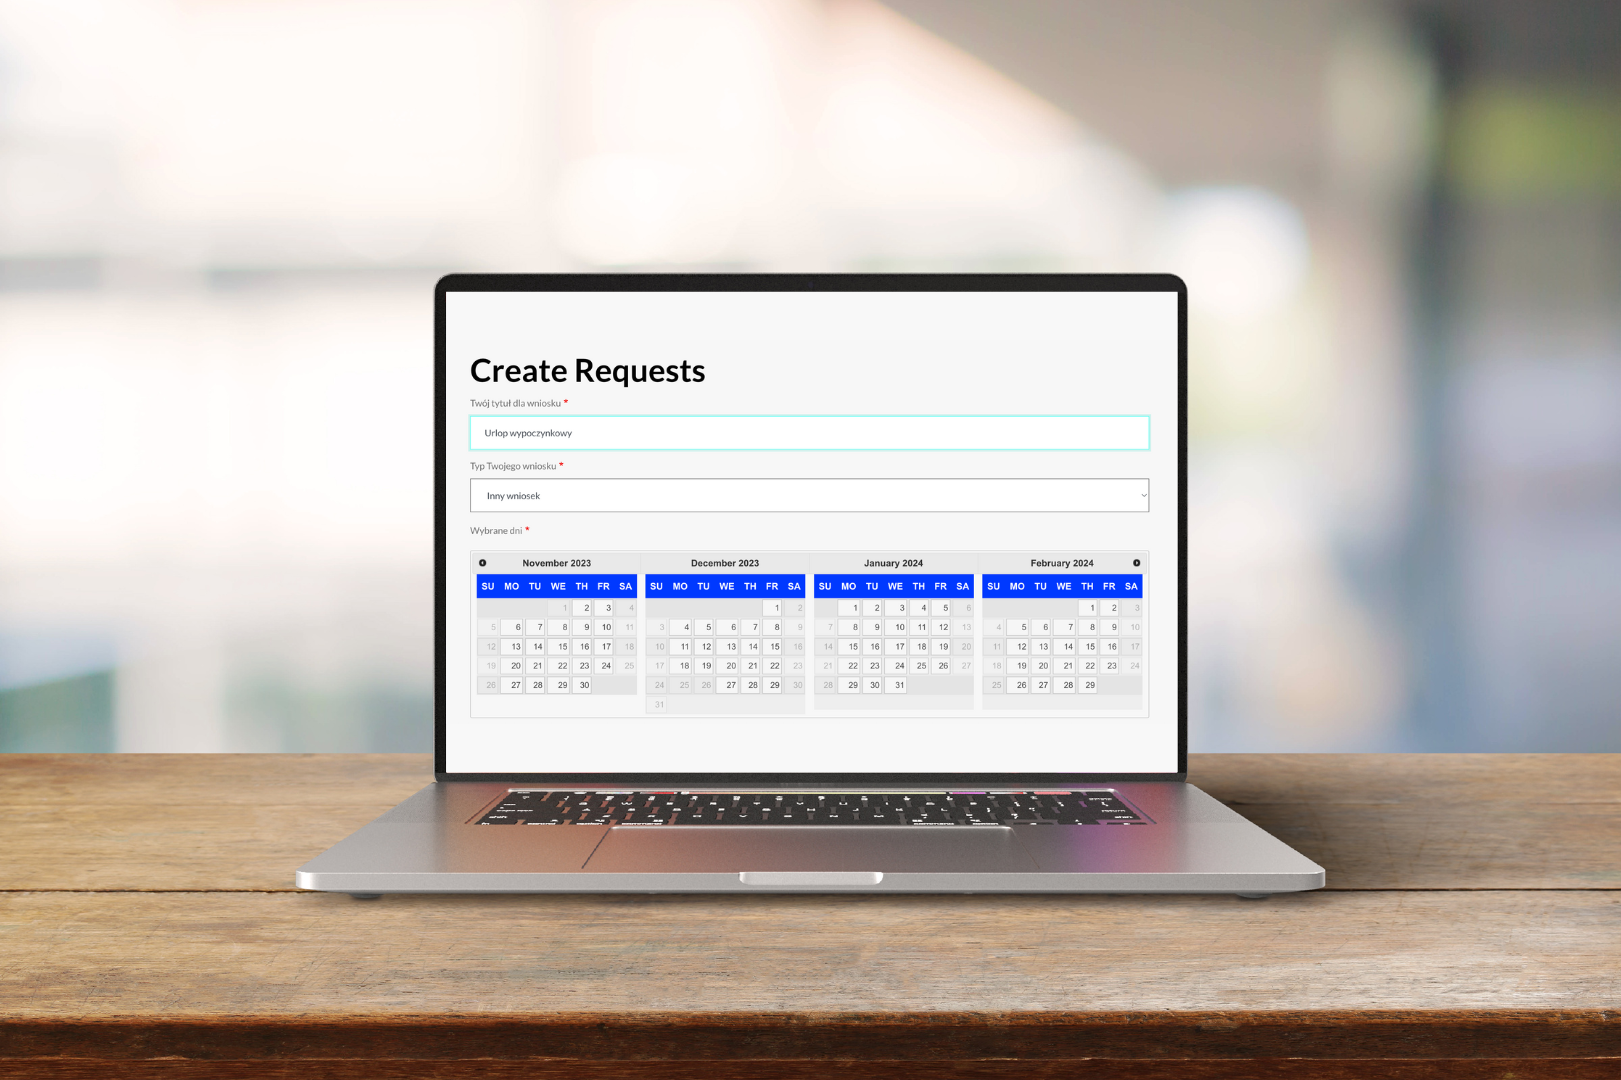 The employee intranet platform often allows people to submit online requests to the company managers